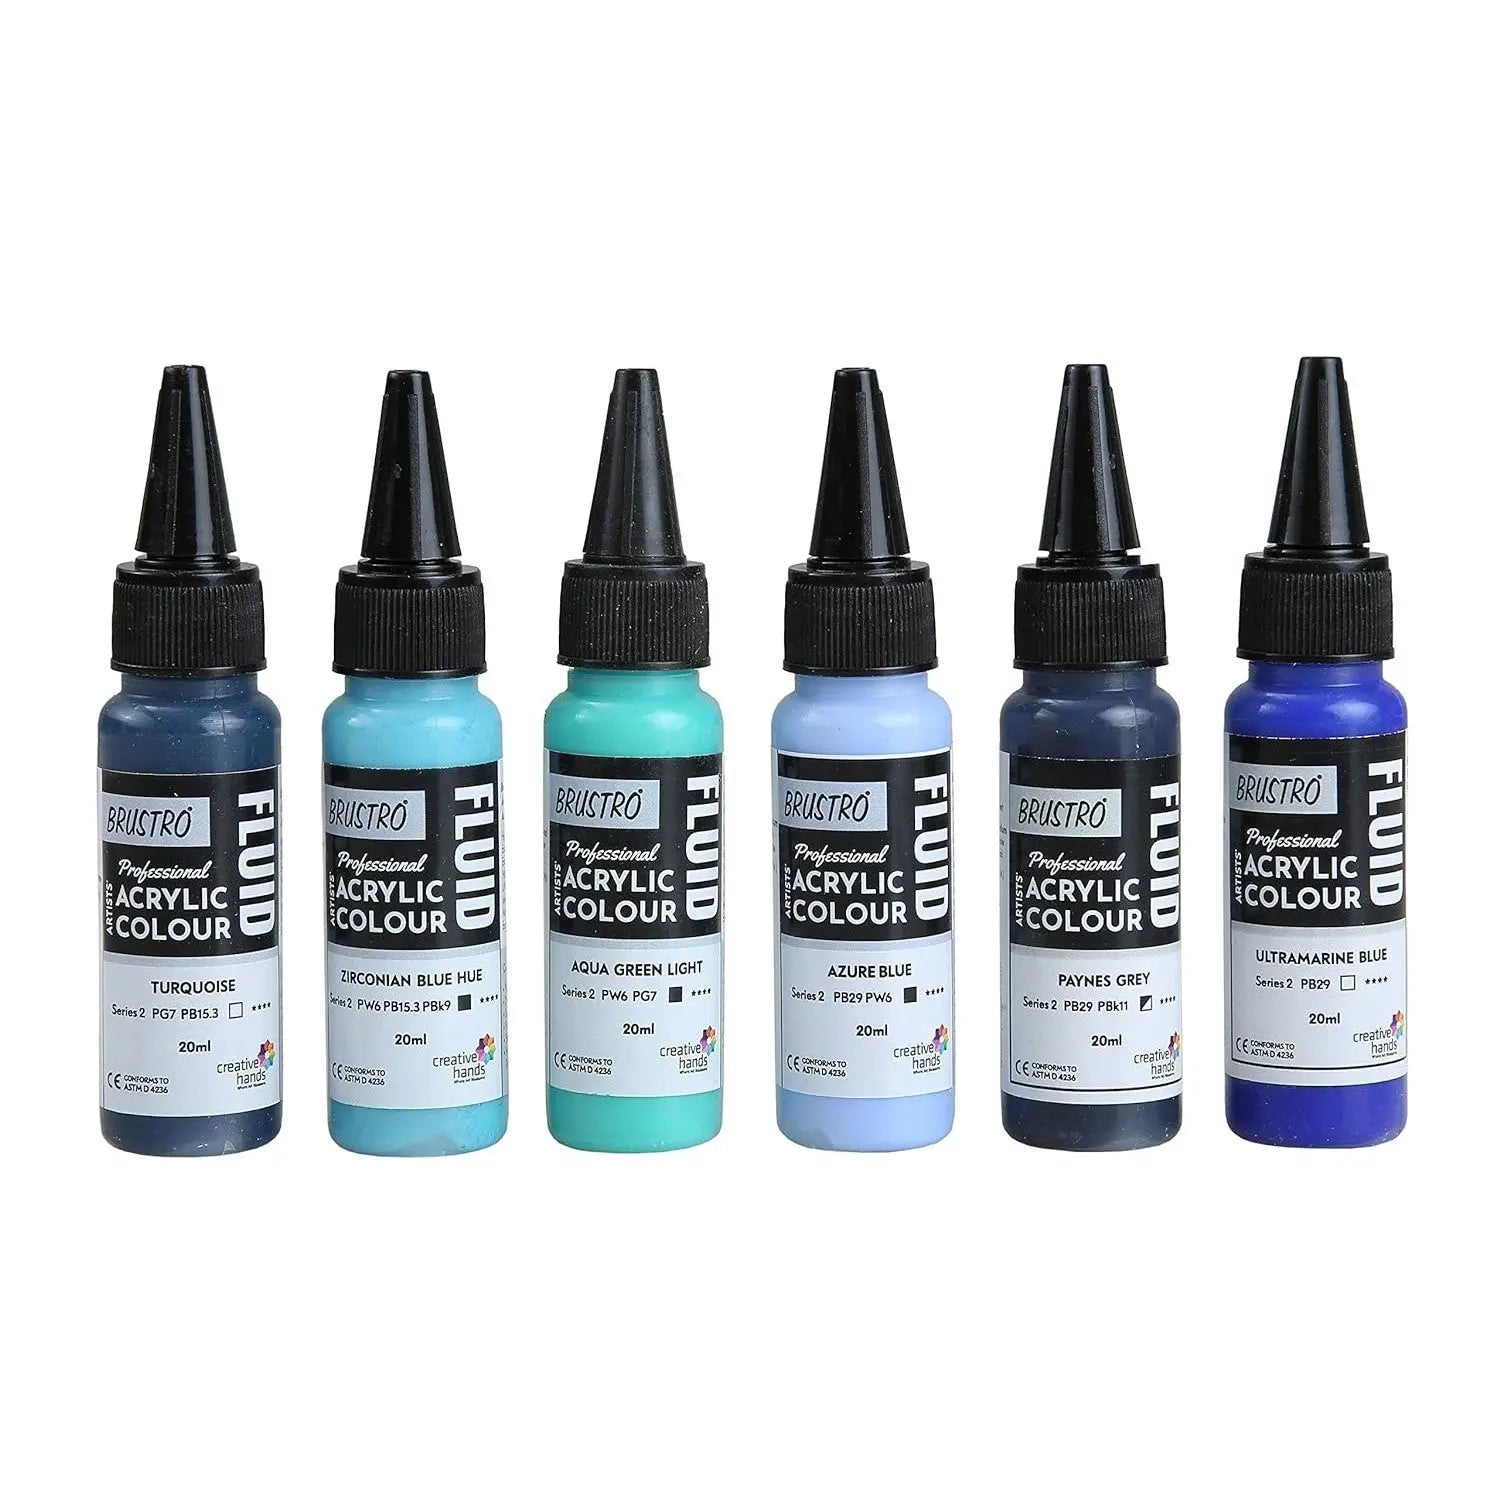 Brustro Professional Artists Acrylic Colour Fluid 20ml Pack Of 6 - Beyond The Blues Brustro